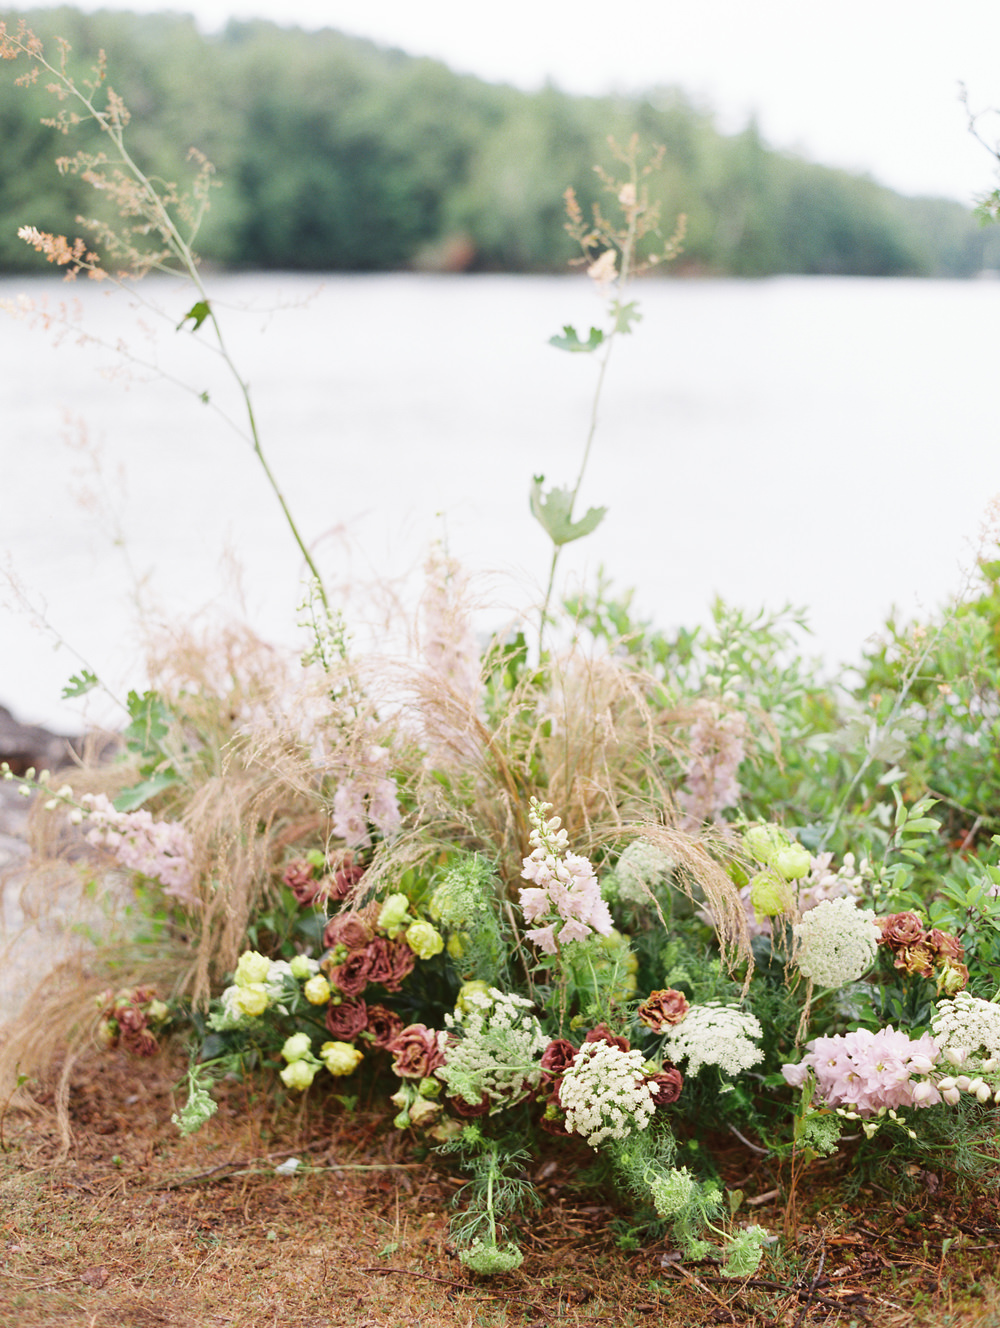 floral install on island rustic greenery matching landscape by Fern Croft for Adirondack Wedding Workshop | Island Elopement by Mary Dougherty